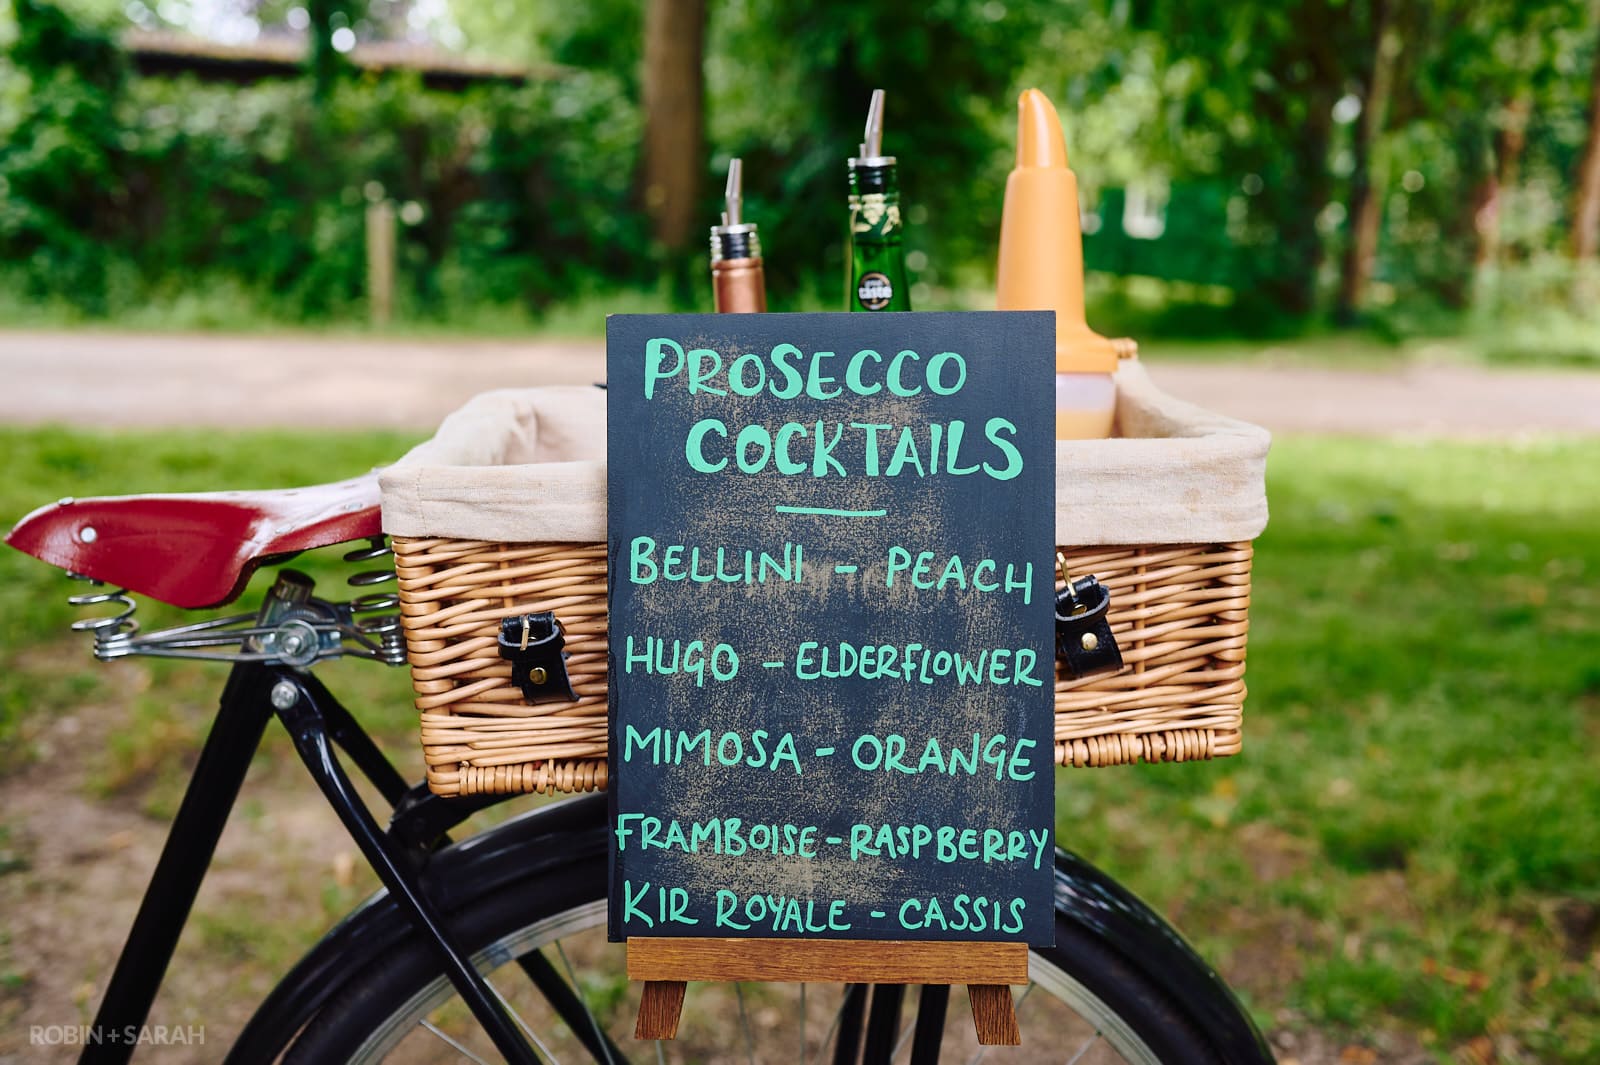 Sign for prosecco cocktails at wedding party